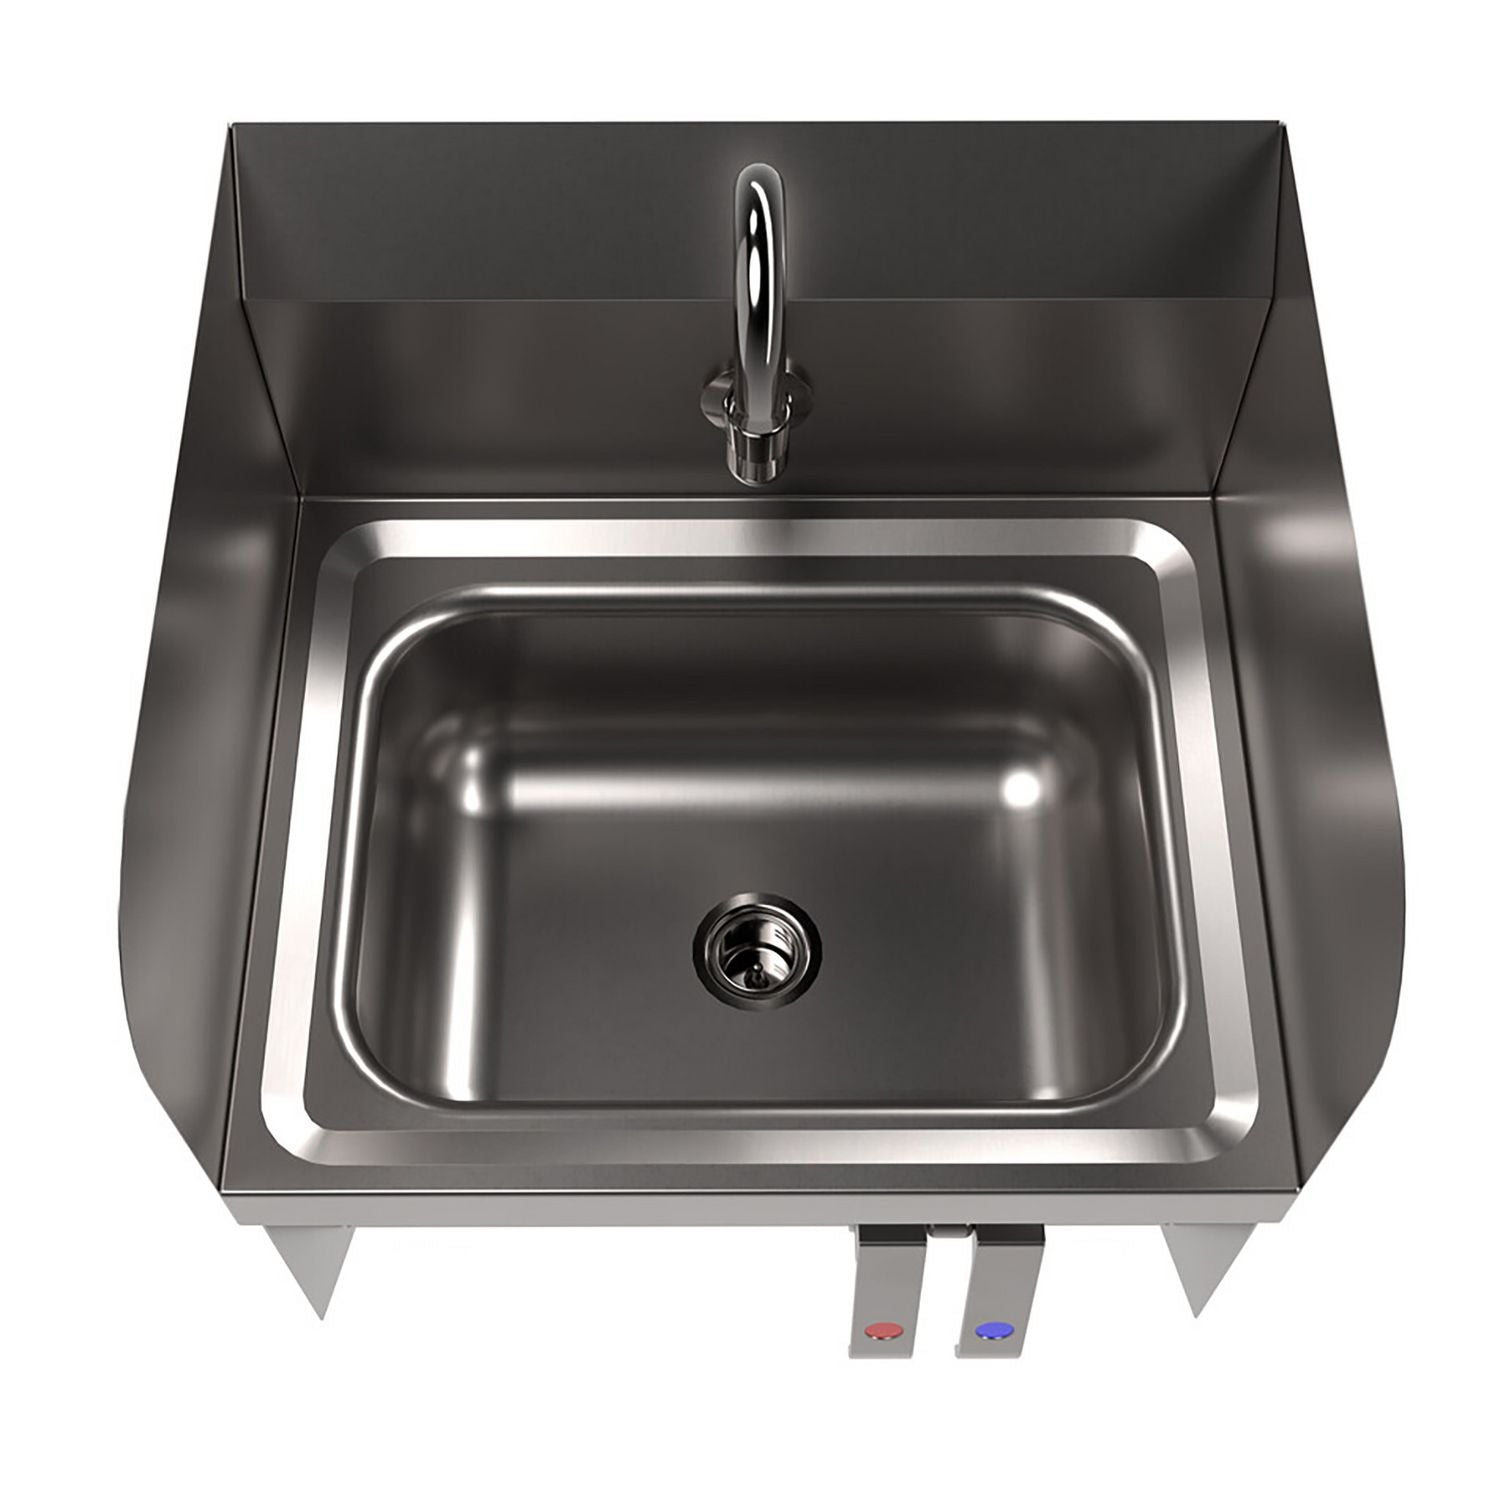 stainless-steel-hand-sink-with-side-splashes-14-l-x-10-w-x-5-d-ships-in-4-6-business-days_bkehsw14101sbkp - 3